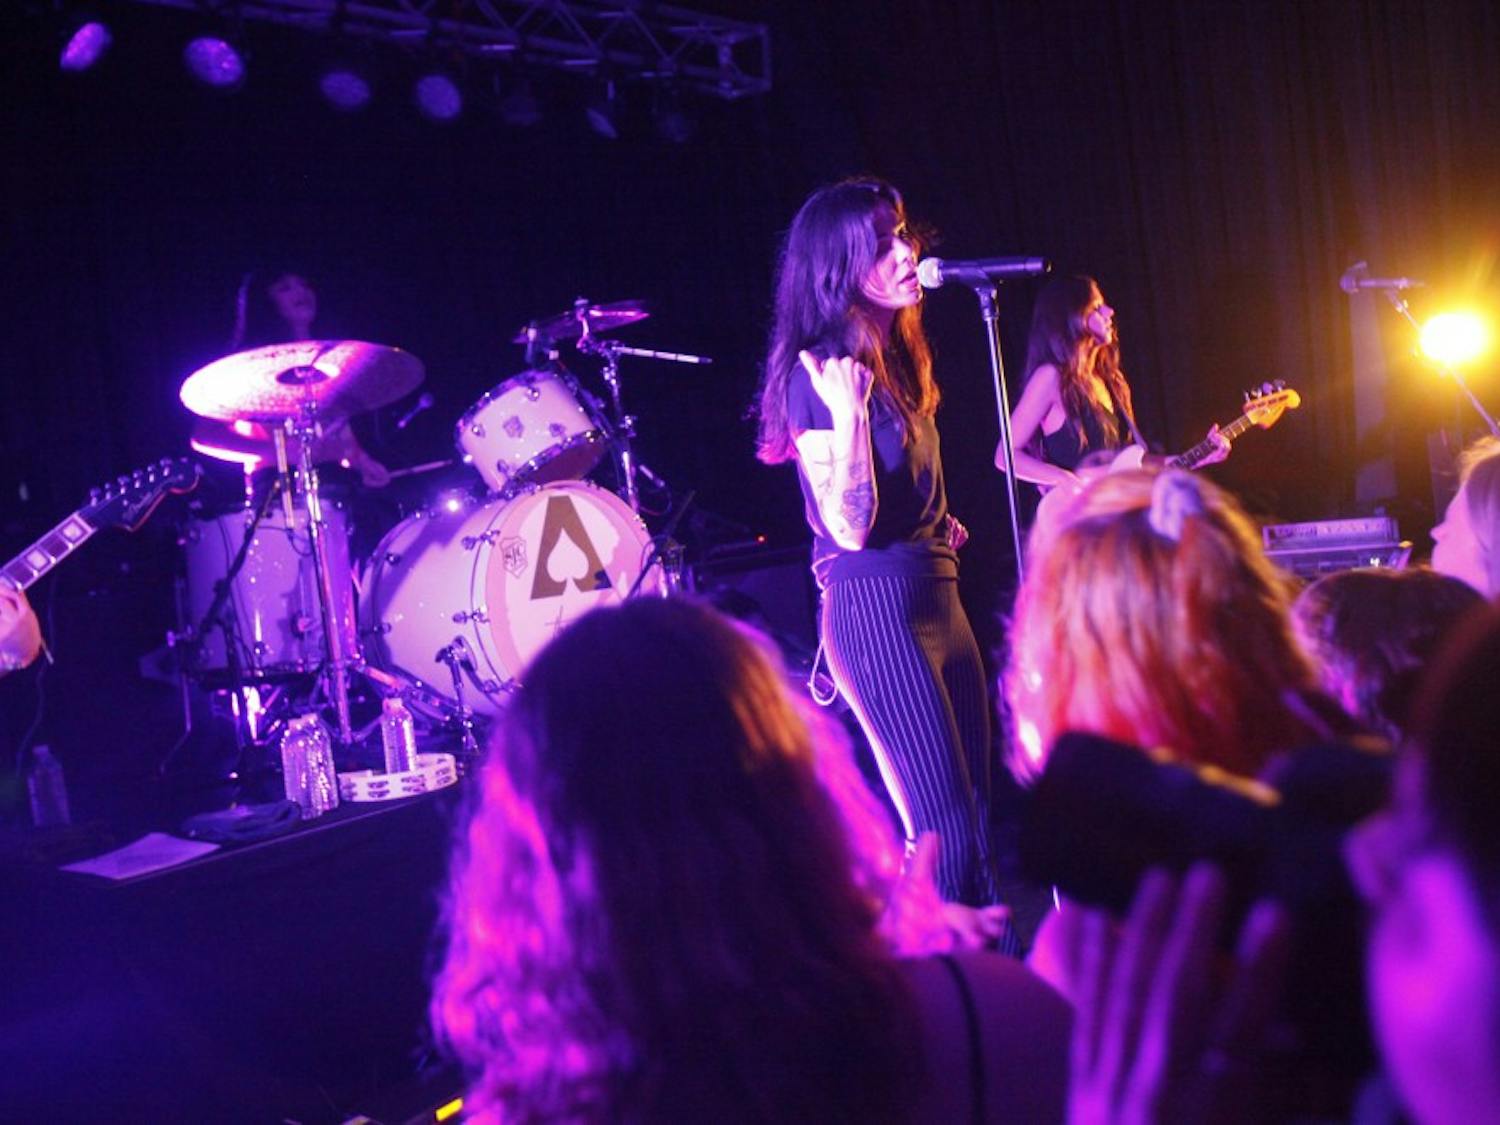 The Aces, an all girl band from Provo, Utah, performed a sold out show in Cat's Cradle's Back Room on Sunday, February 24, 2019. The Aces have an infectious energy that lit up the entire venue. During the show Cristal Ramirez, the band's lead singer asked one of the fans in the crowd to say "Carrboro" for her so she would not mess up the pronunciation. During their song "Volcanic Love" fans held up hand made flowers over their phone flashlights and swayed along with the song. The Aces' sold out show was filled up with fans of all ages and the band made an effort to make every member of the audience a part of the show.&nbsp;